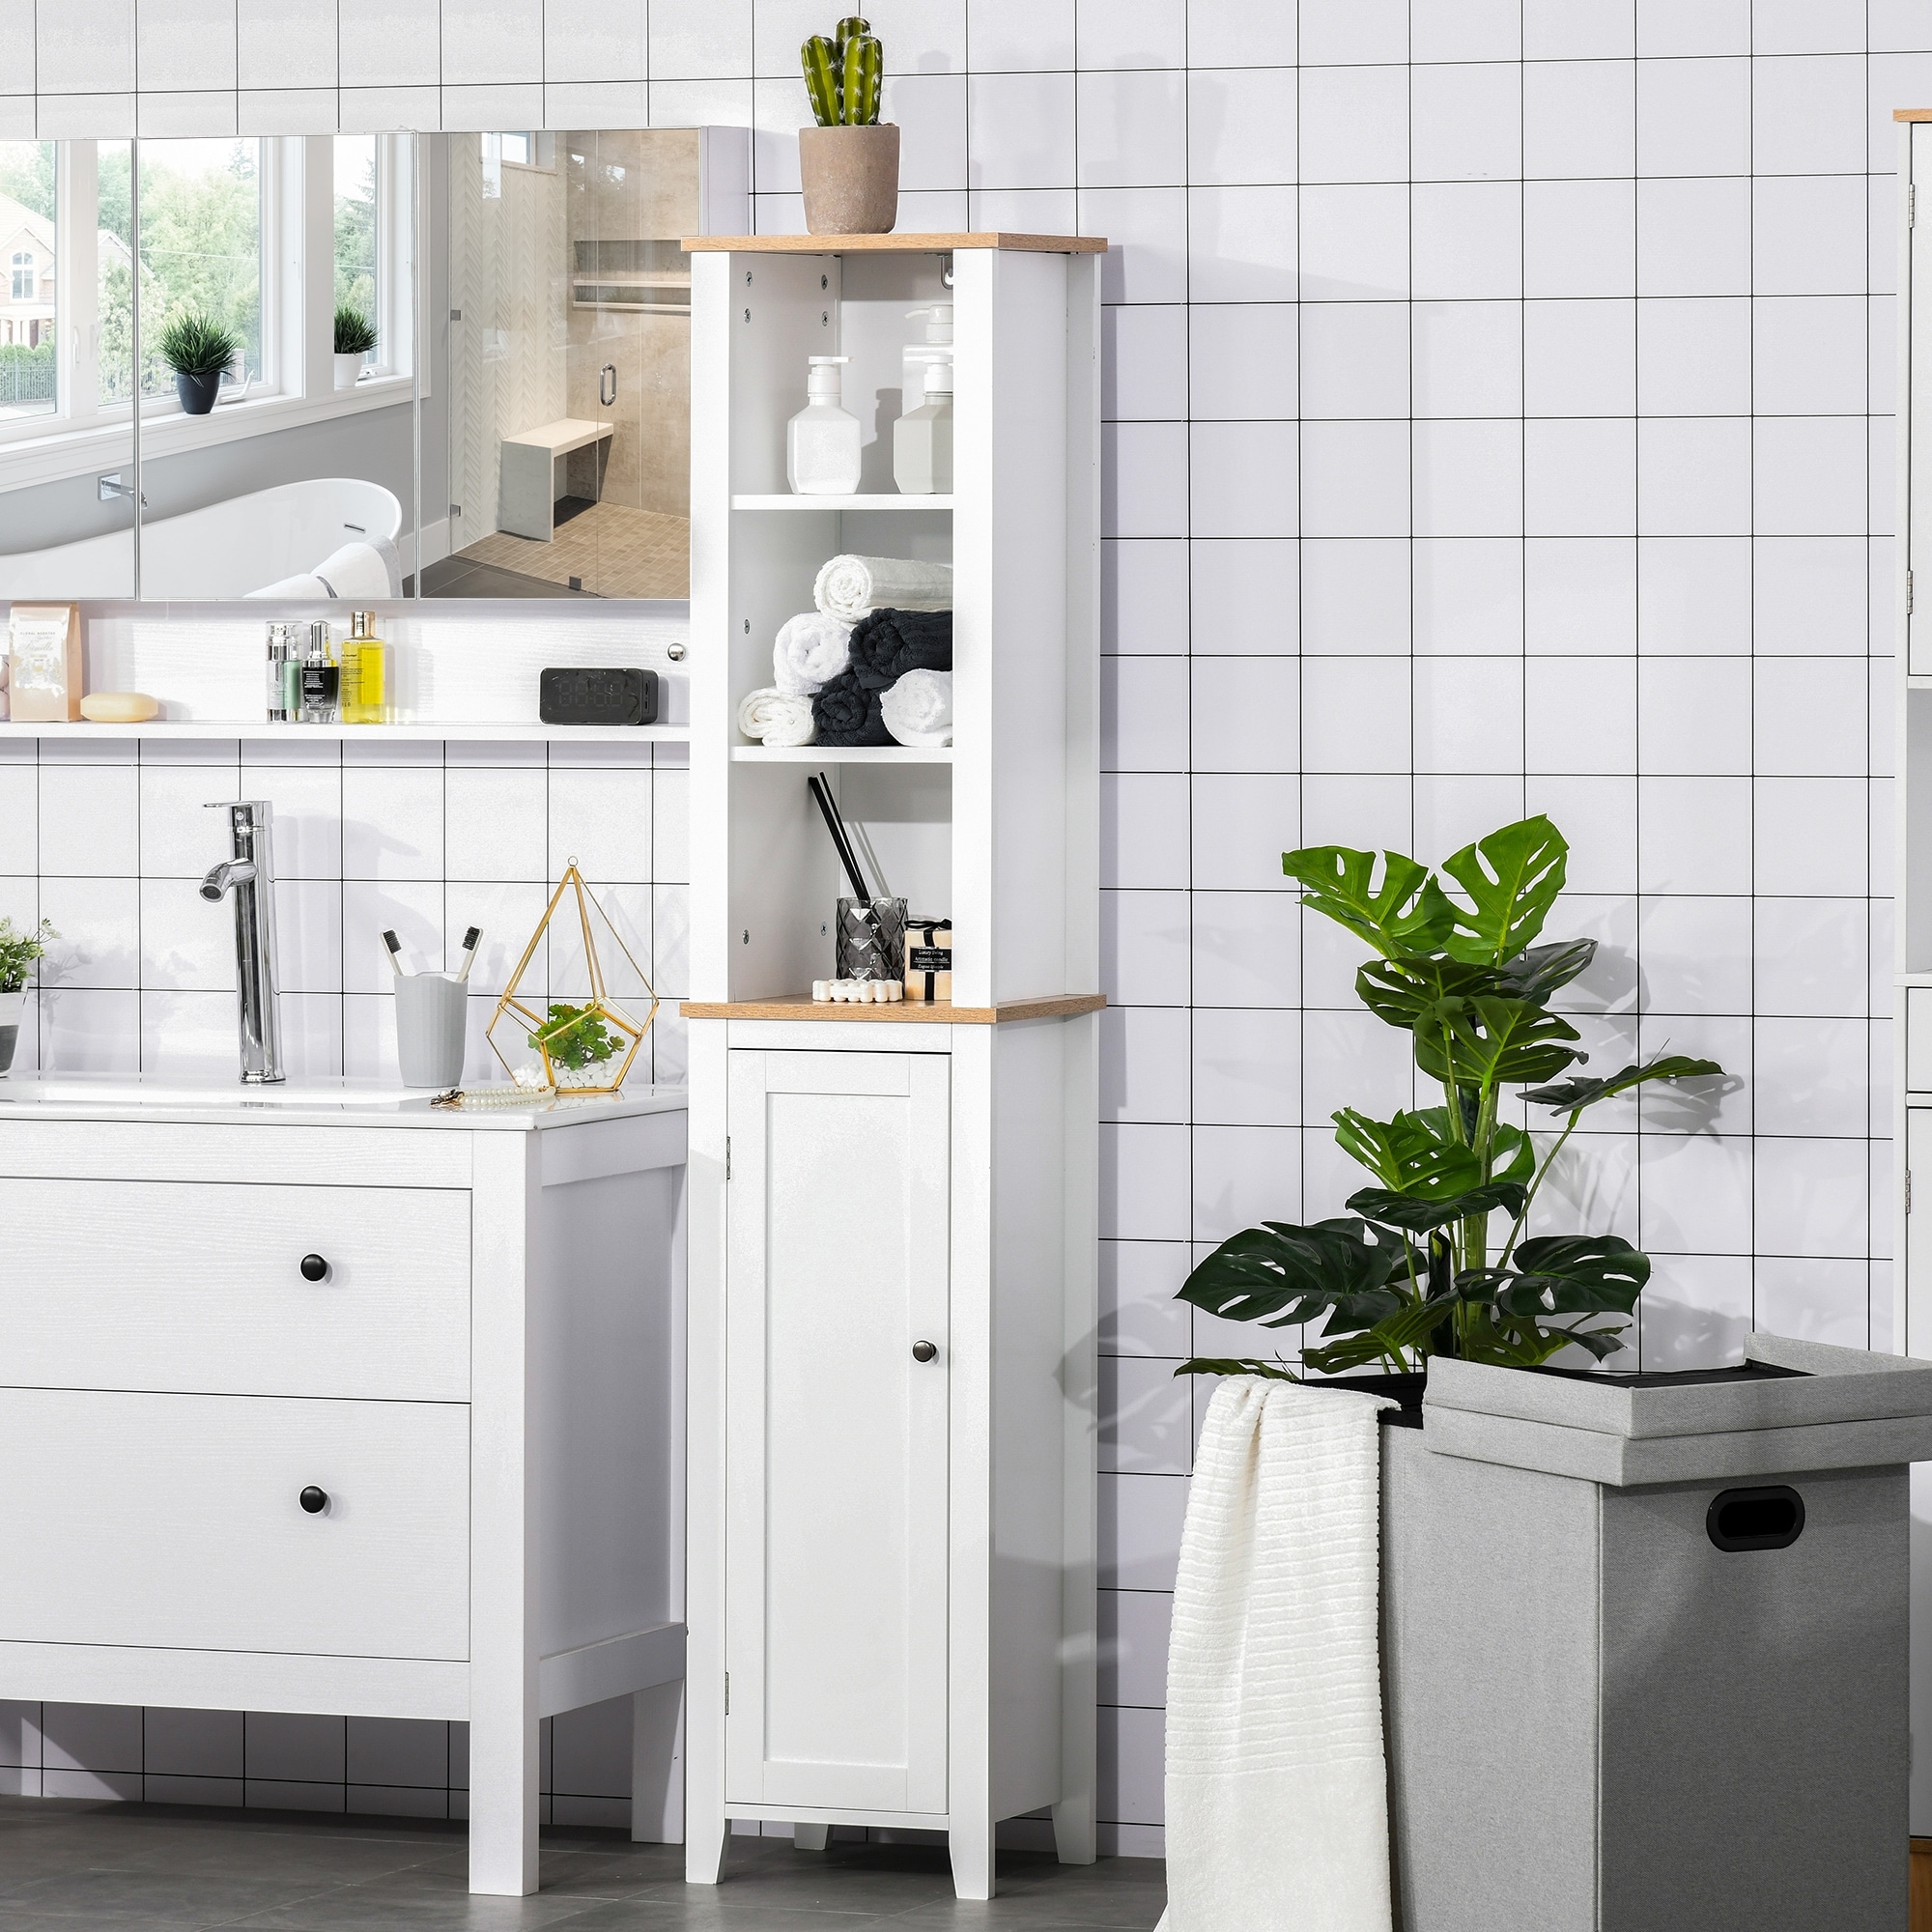 https://ak1.ostkcdn.com/images/products/is/images/direct/e939c5bb42cb4ebdaeabec47e9436bbc7e7d0437/Kleankin-Bathroom-Storage-Cabinet-with-3-Tier-Adjustable-Shelf-Storage-Linen-Tower-Enclosed-Cabinet%2C-White.jpg